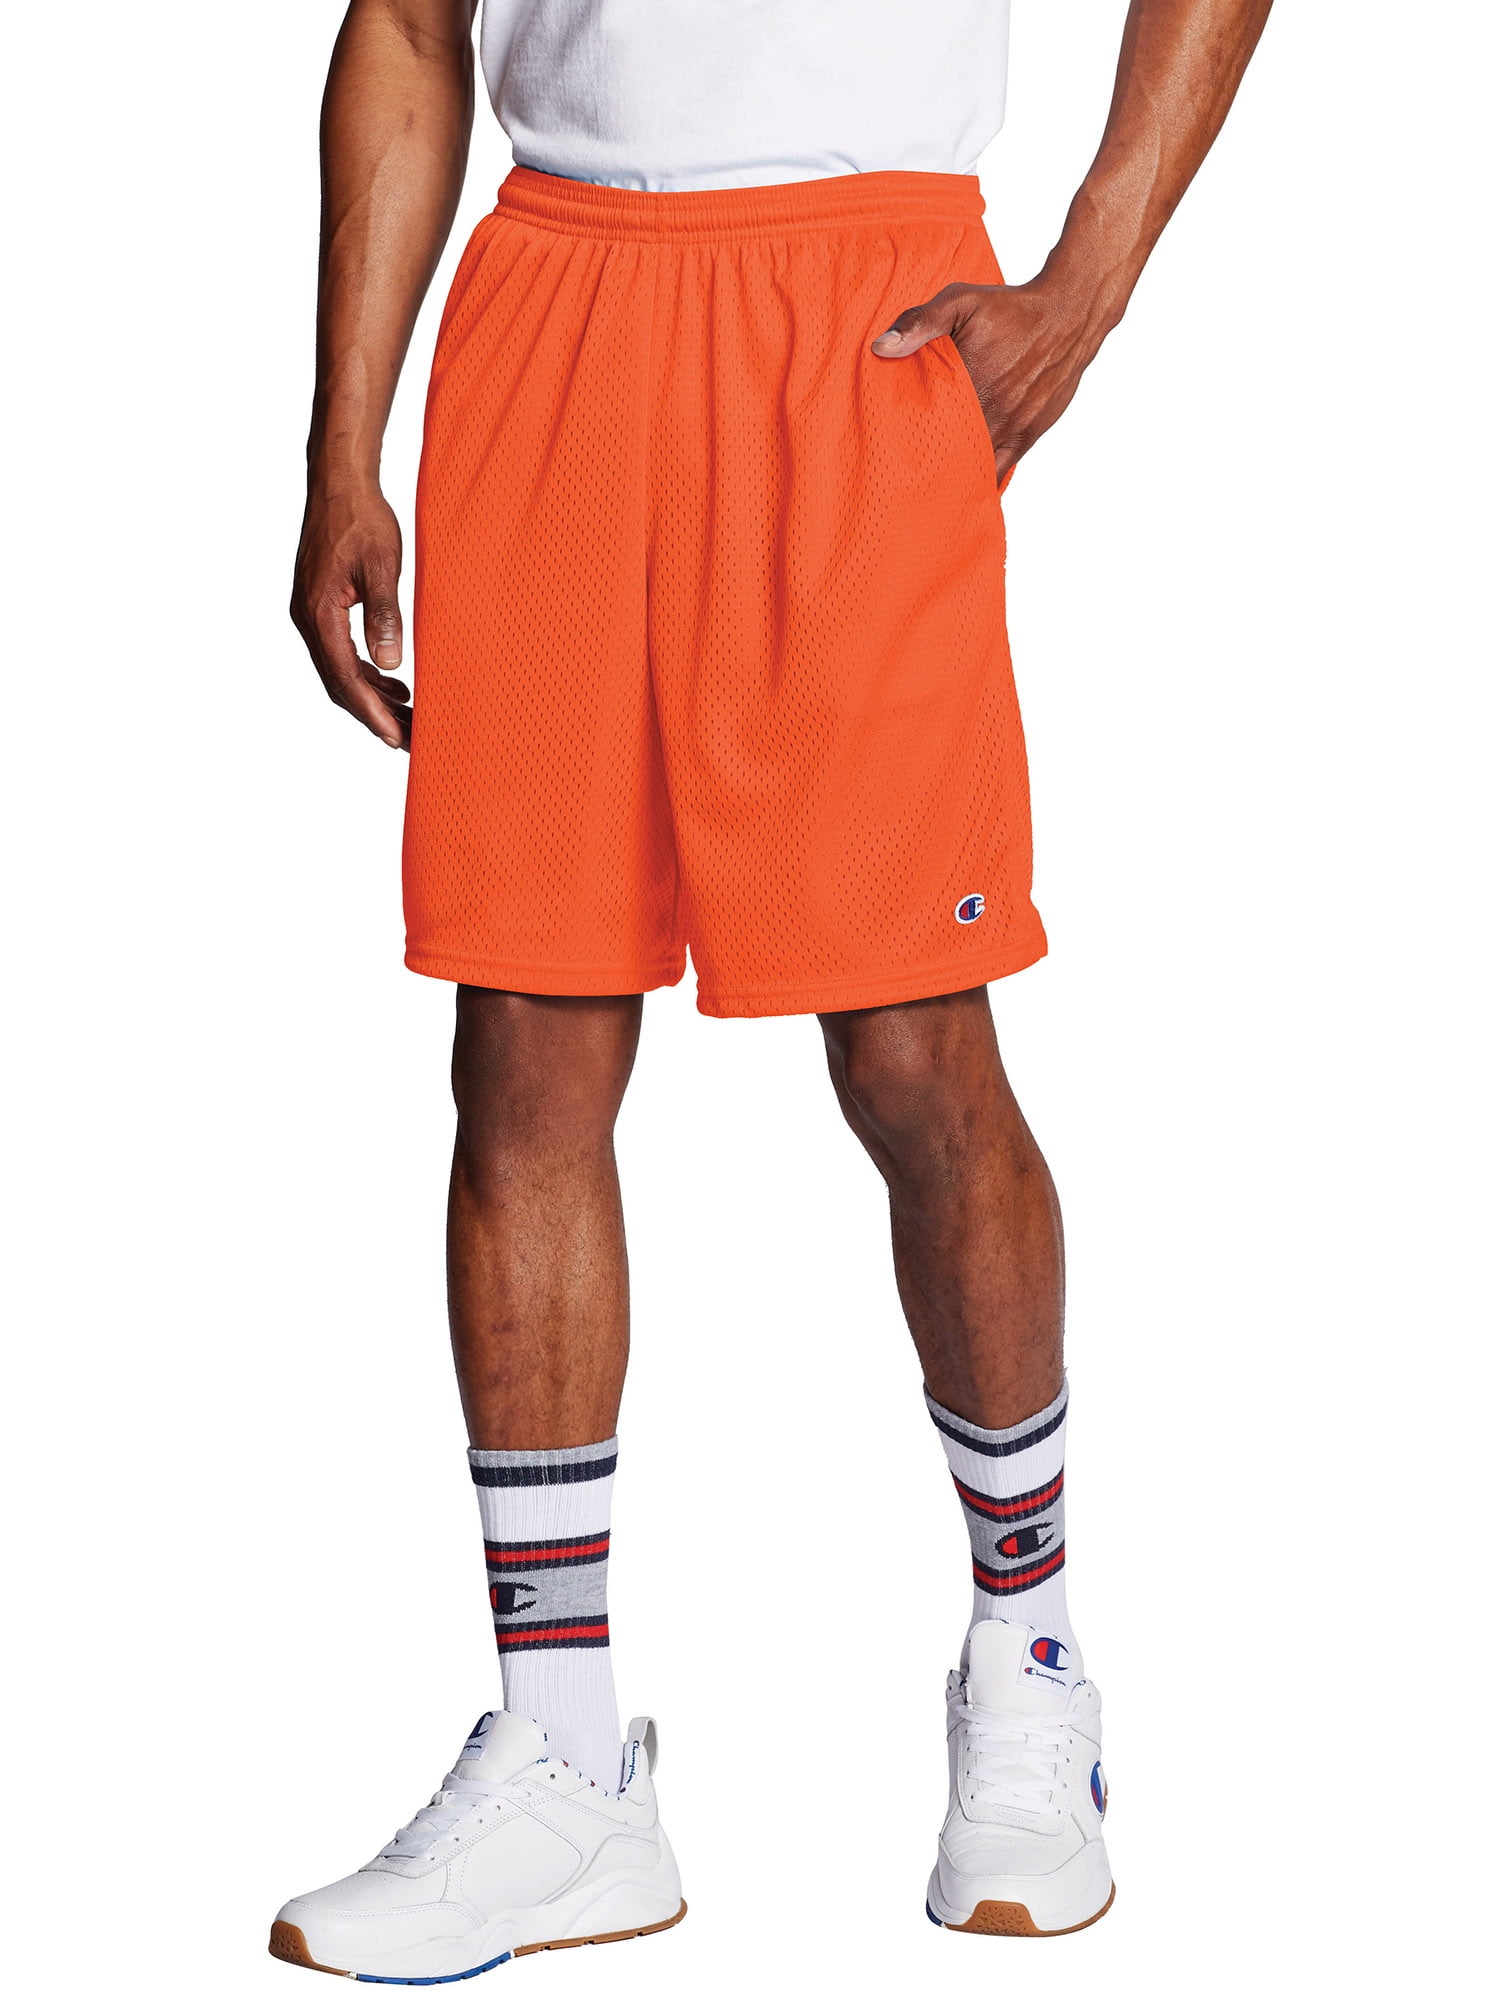 Mens Moisture-Wicking Long Mesh Shorts with Pockets in Sizes XS-4XL 